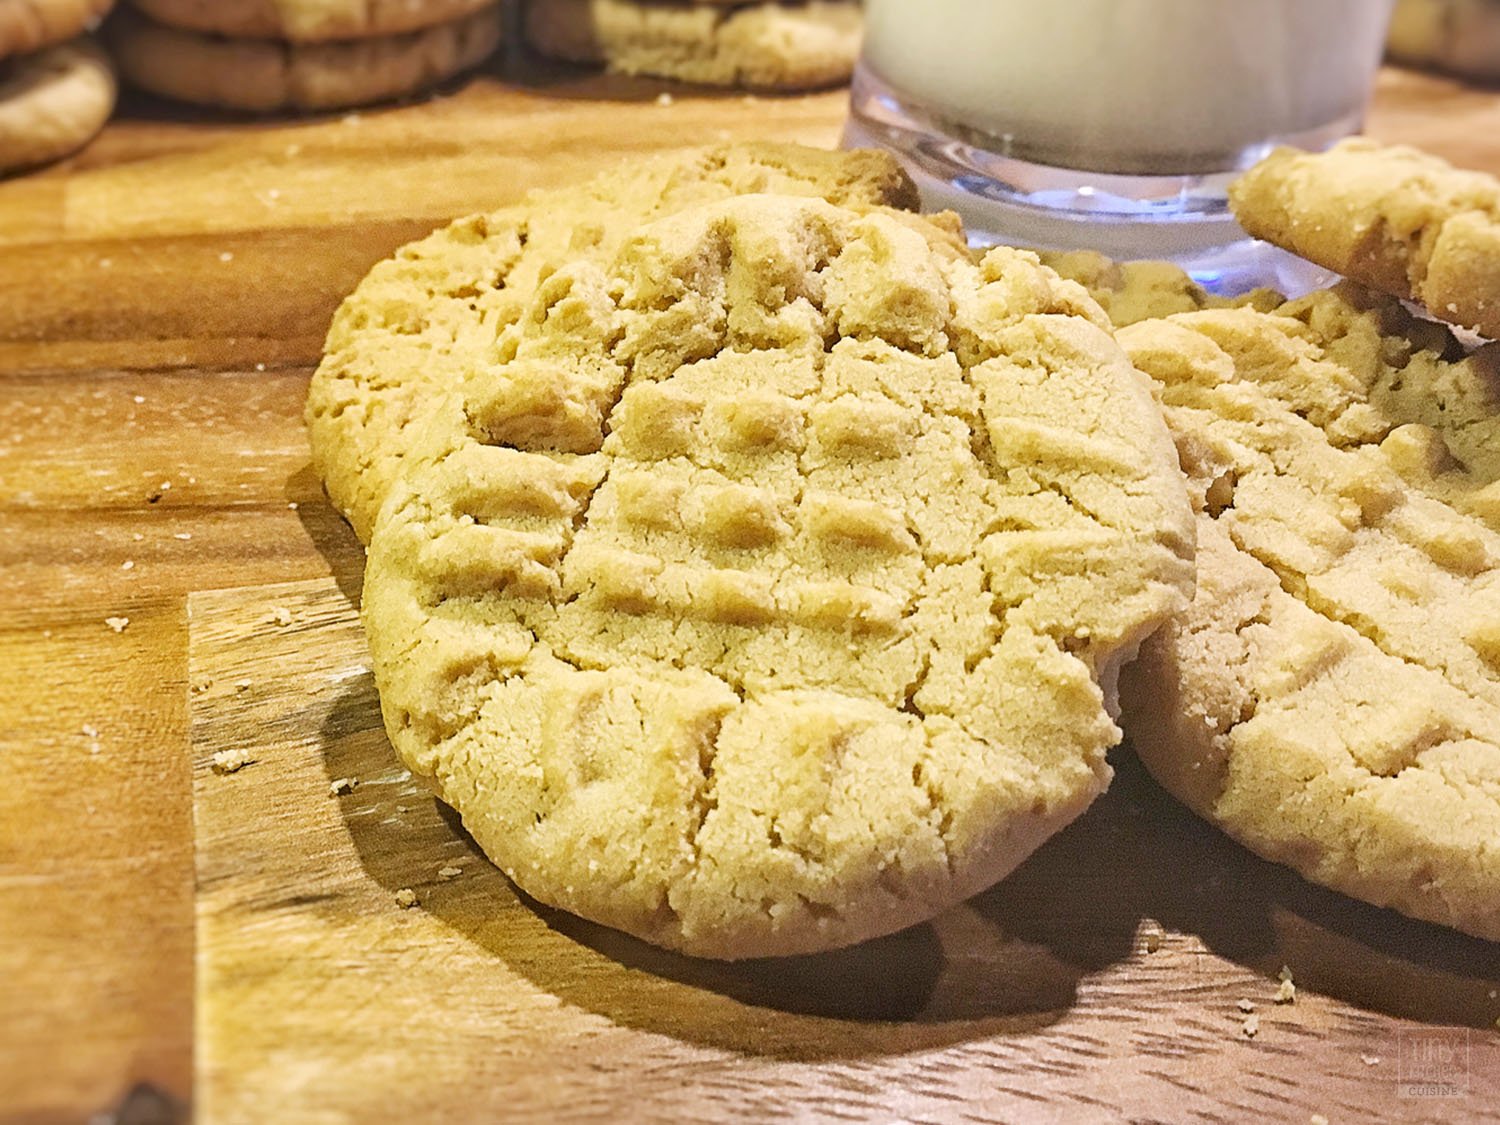 Love peanut butter cookies? They're salty, sweet, crunchy... bake this peanut butter cookie recipe and you will be coming back for more! | Tiny Kitchen Cuisine | http://tiny.kitchen